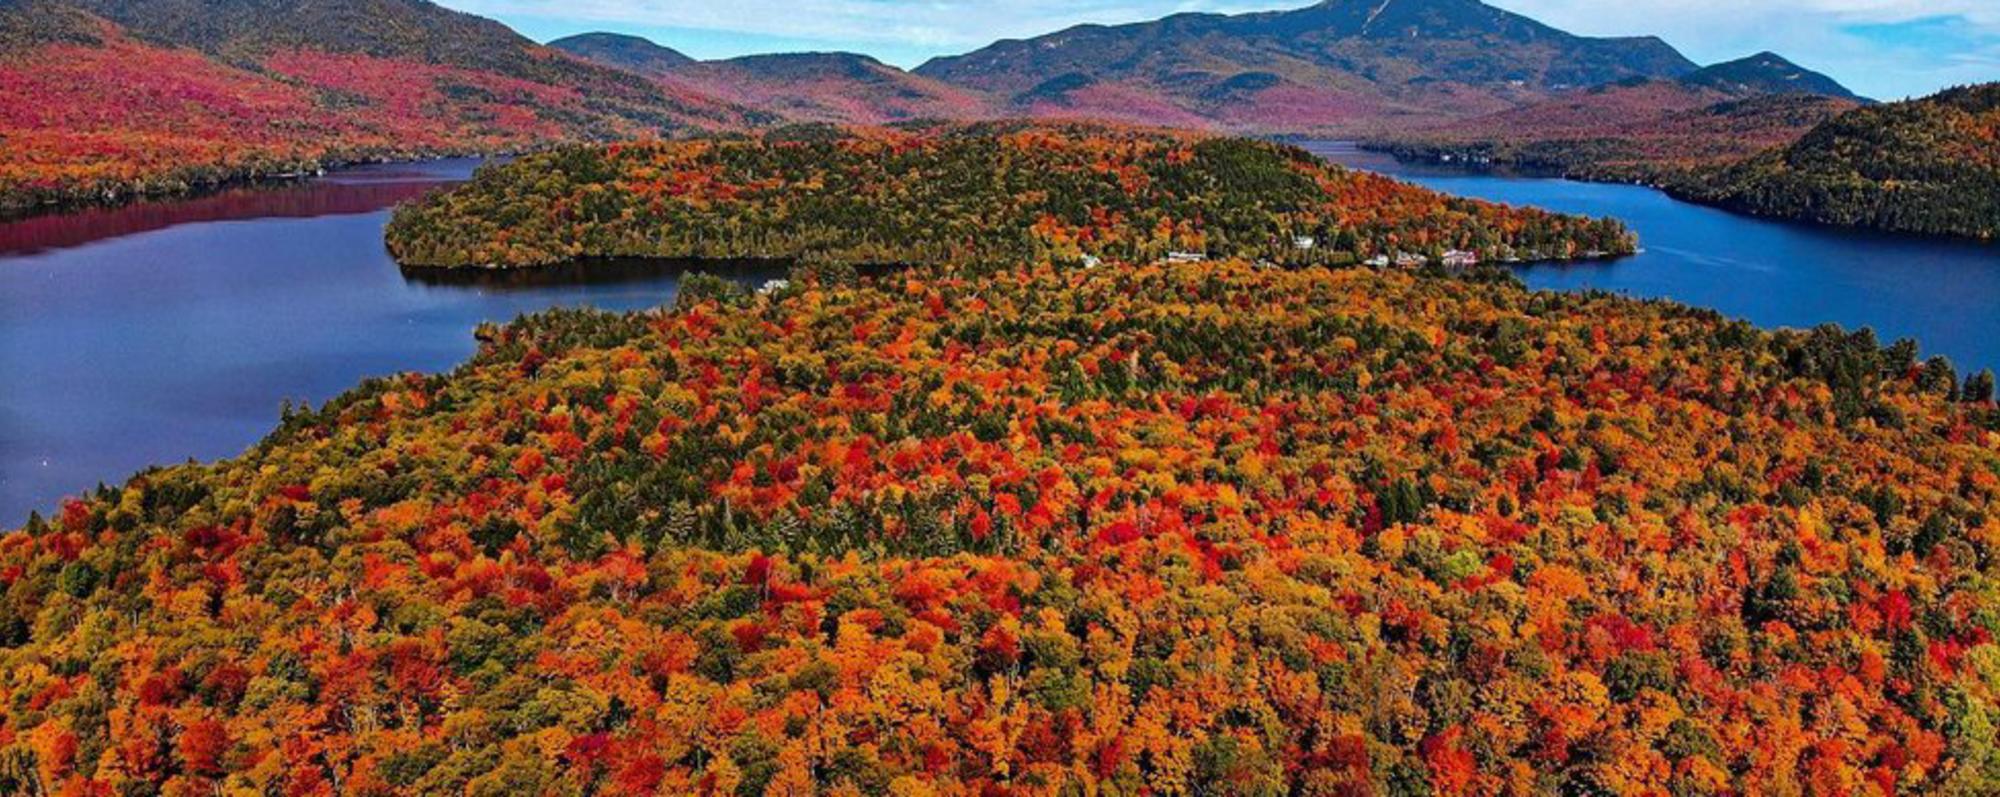 Varying colors of red, orange, yellow, and green trees surround blue lake waters with colorful mountains in the background